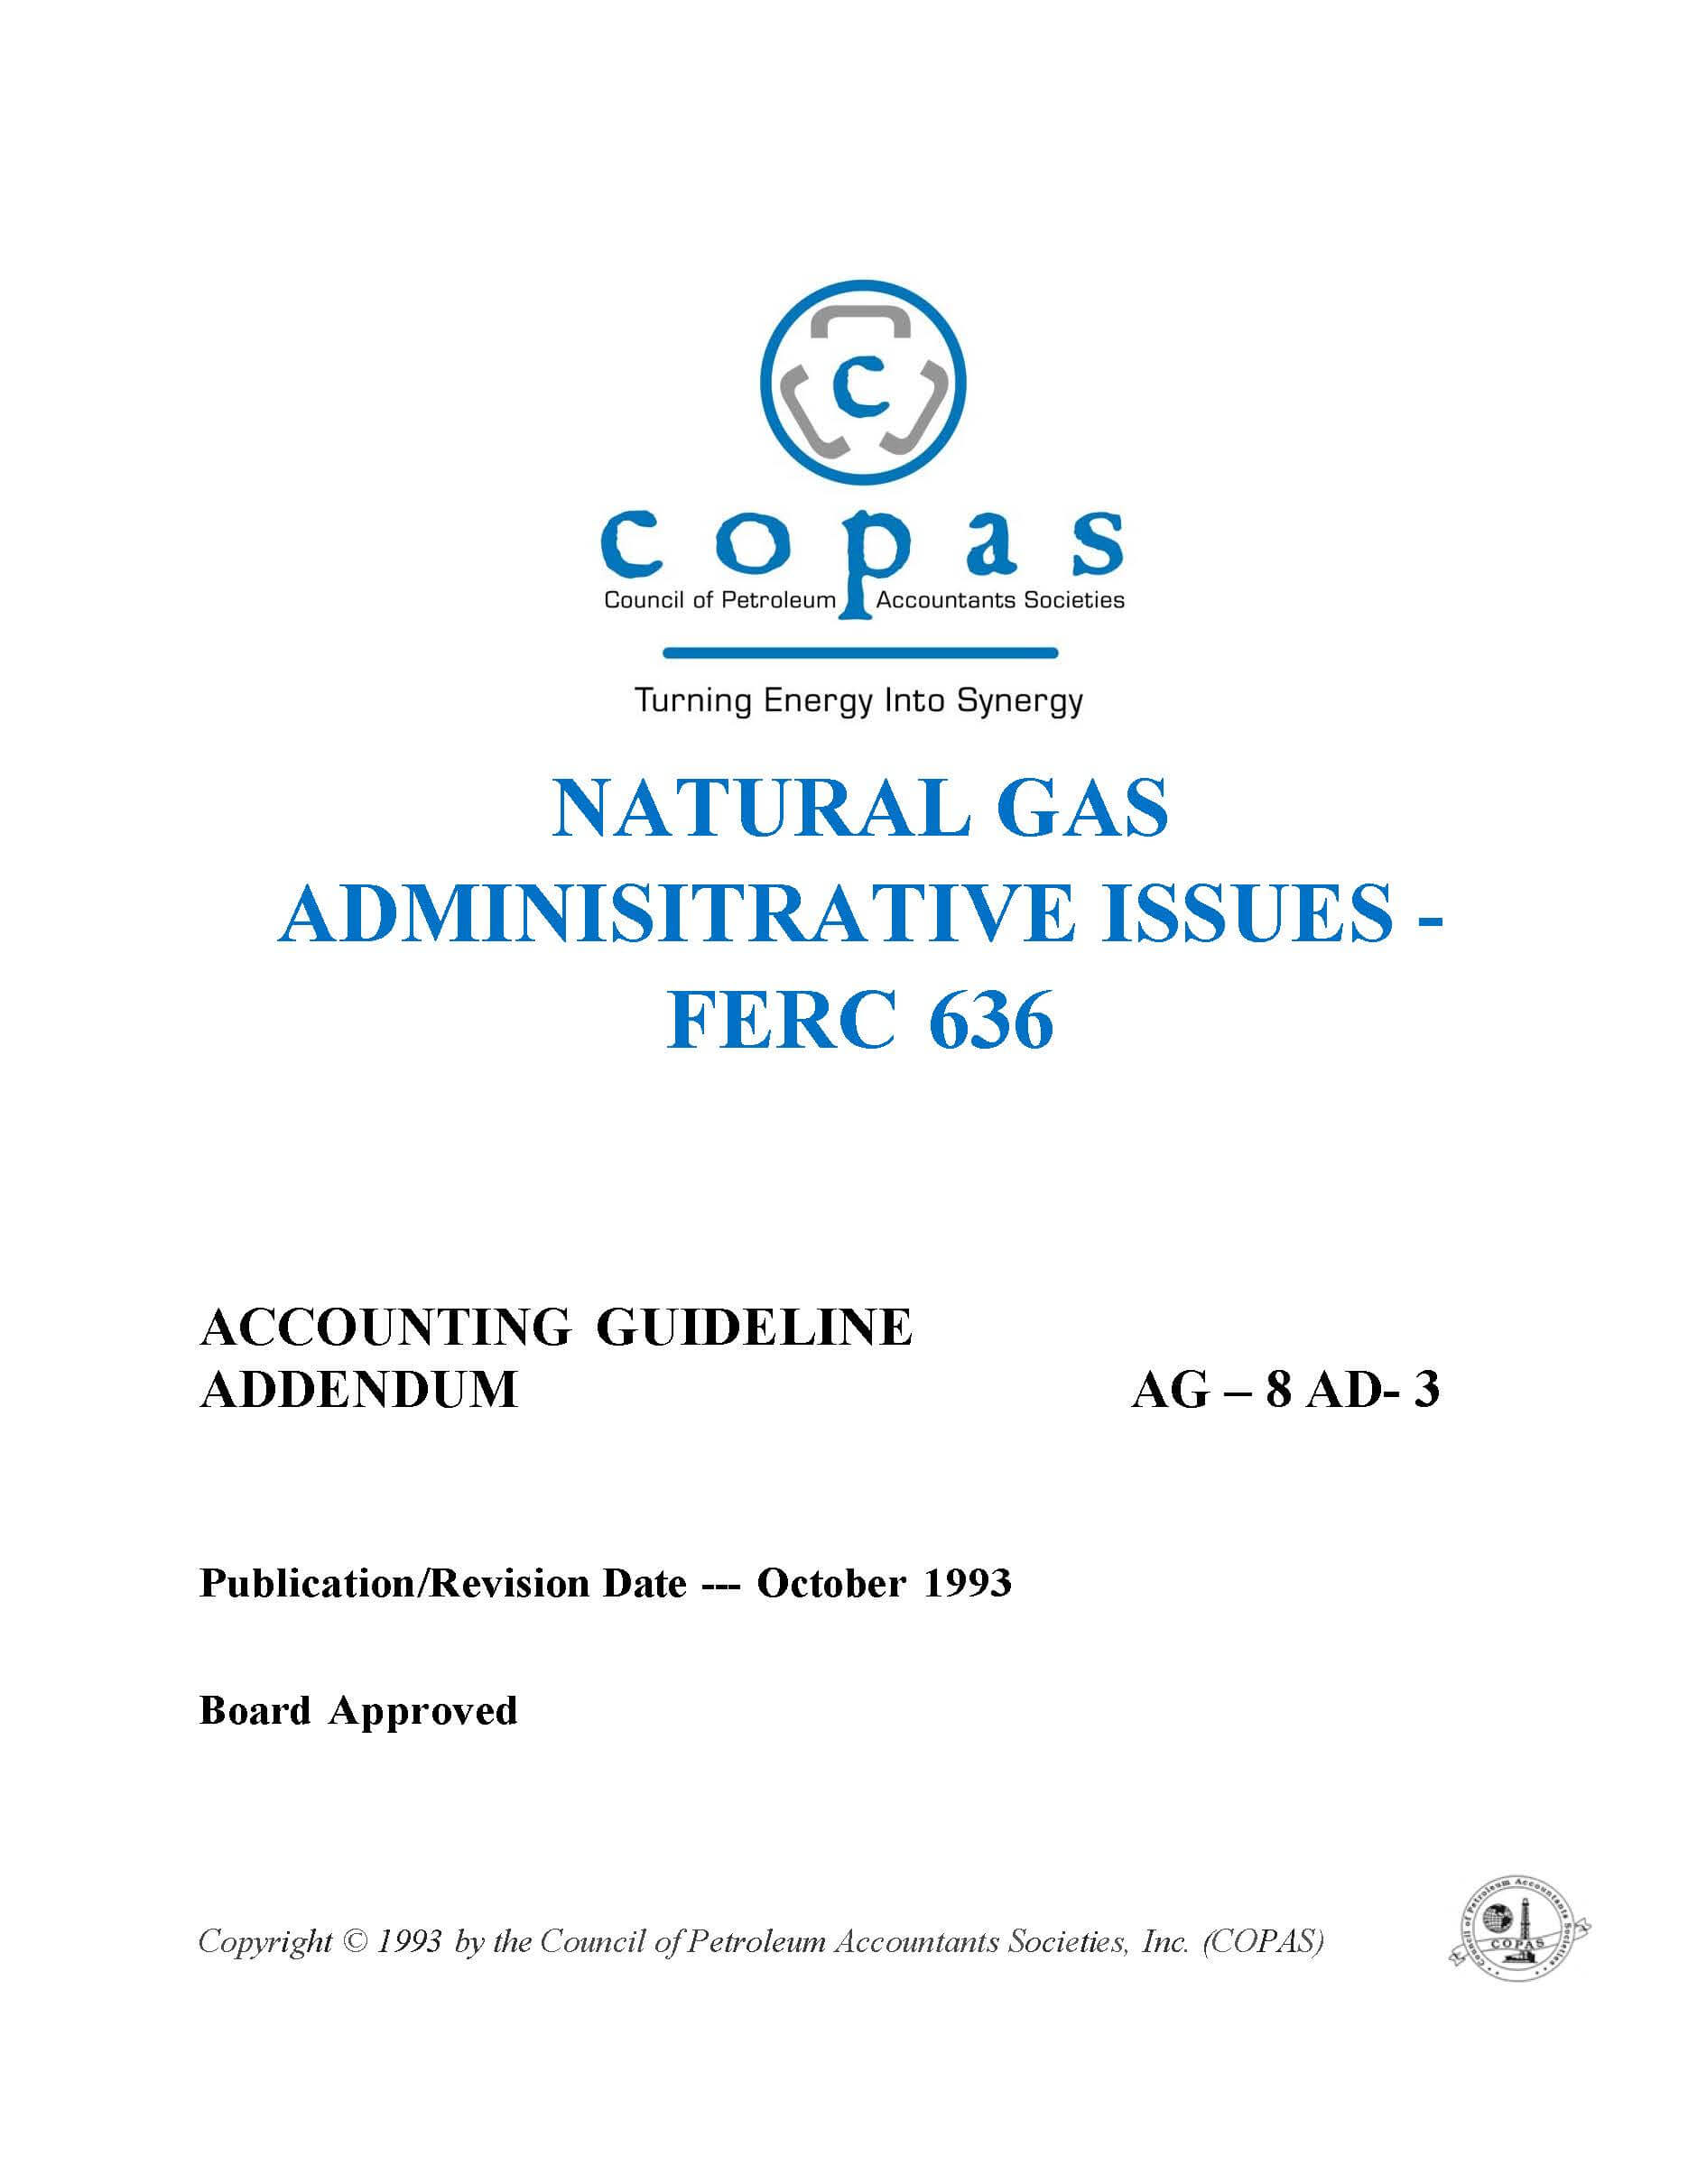 AG-8 AD-3 Natural Gas Administrative Issues - FERC 636 - products AG 8 AD 3 Natural Gas Administrative Issues FERC 636 - Council of Petroleum Accountants Societies